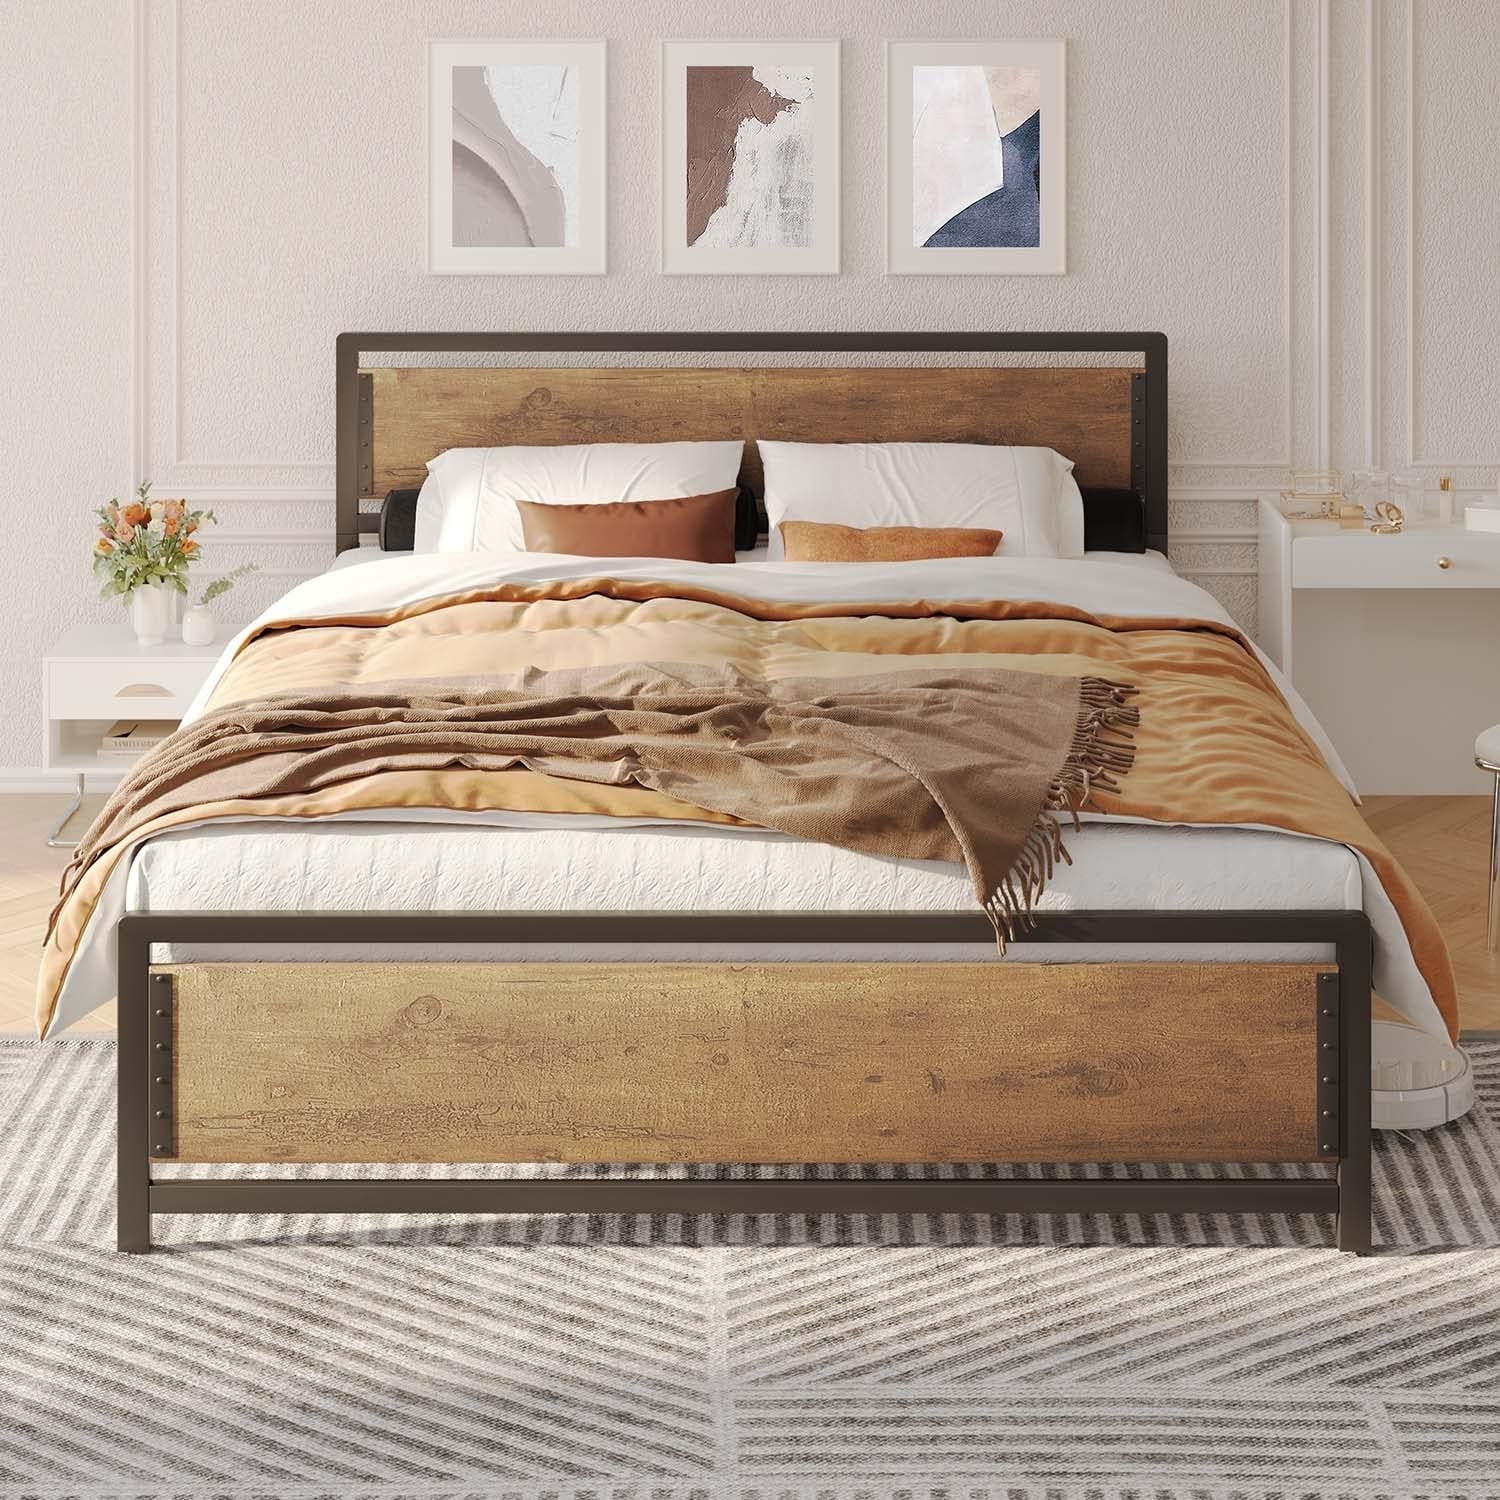 Queen Metal Platform Bed Frame with Wooden Headboard, 15 Iron Slats, Large Underbed Storage, Easy Assembly, No Box Spring Needed